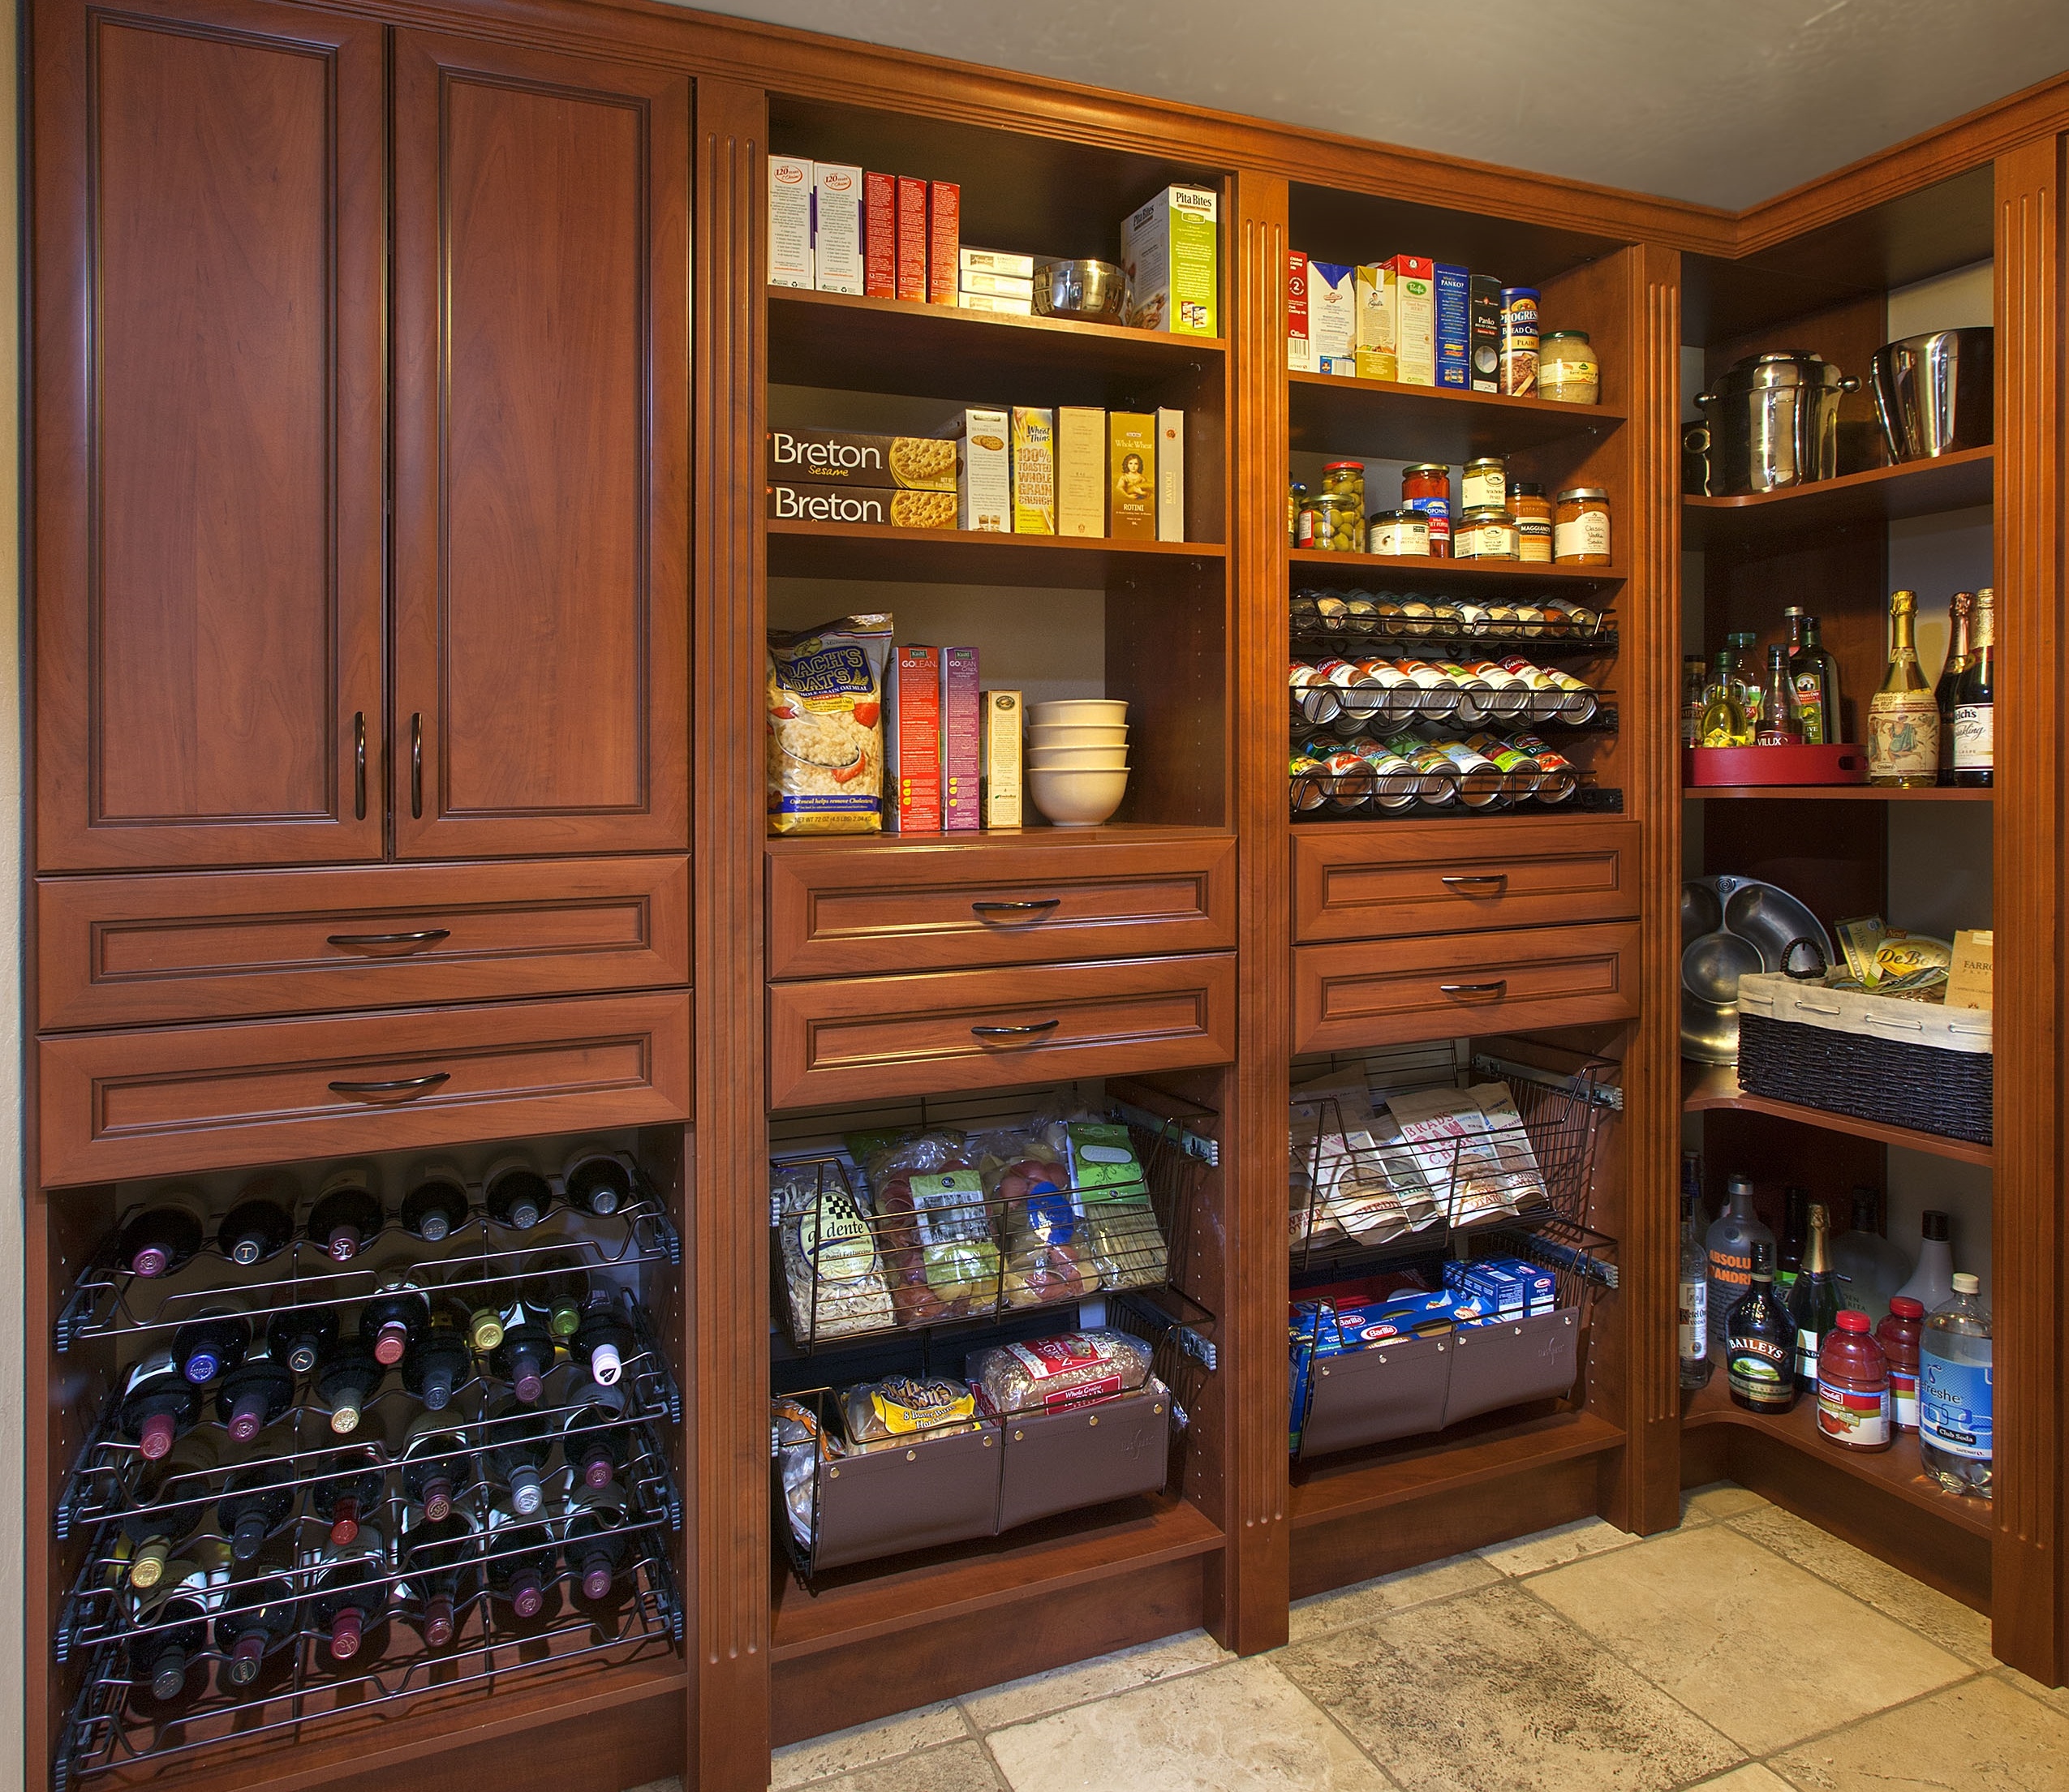 4 Steps for Pantry Organization